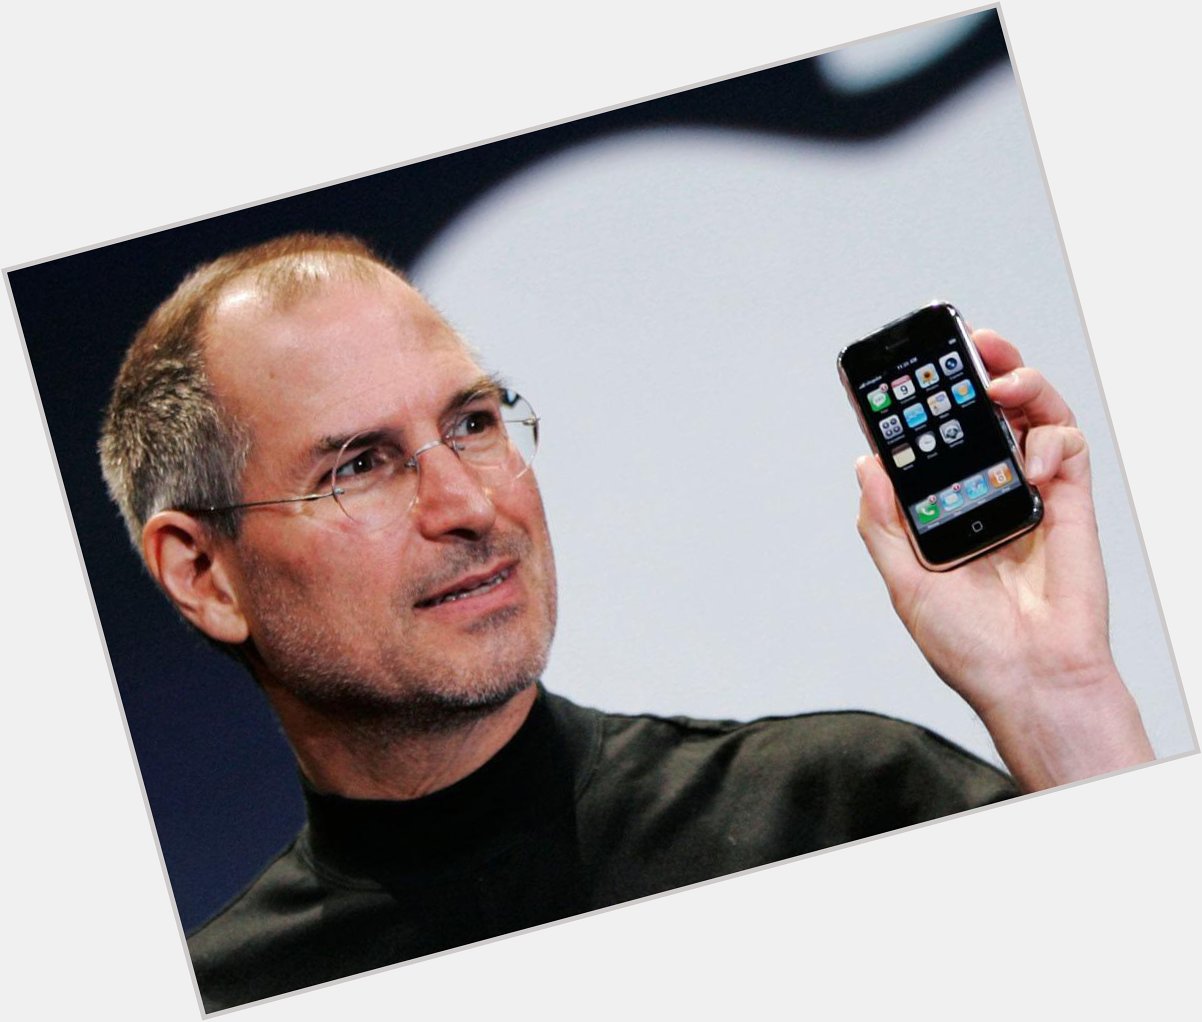 So Today Is Steve Jobs Birthday
Sadly He Is Not Here But Happy Birthday Anyway! 